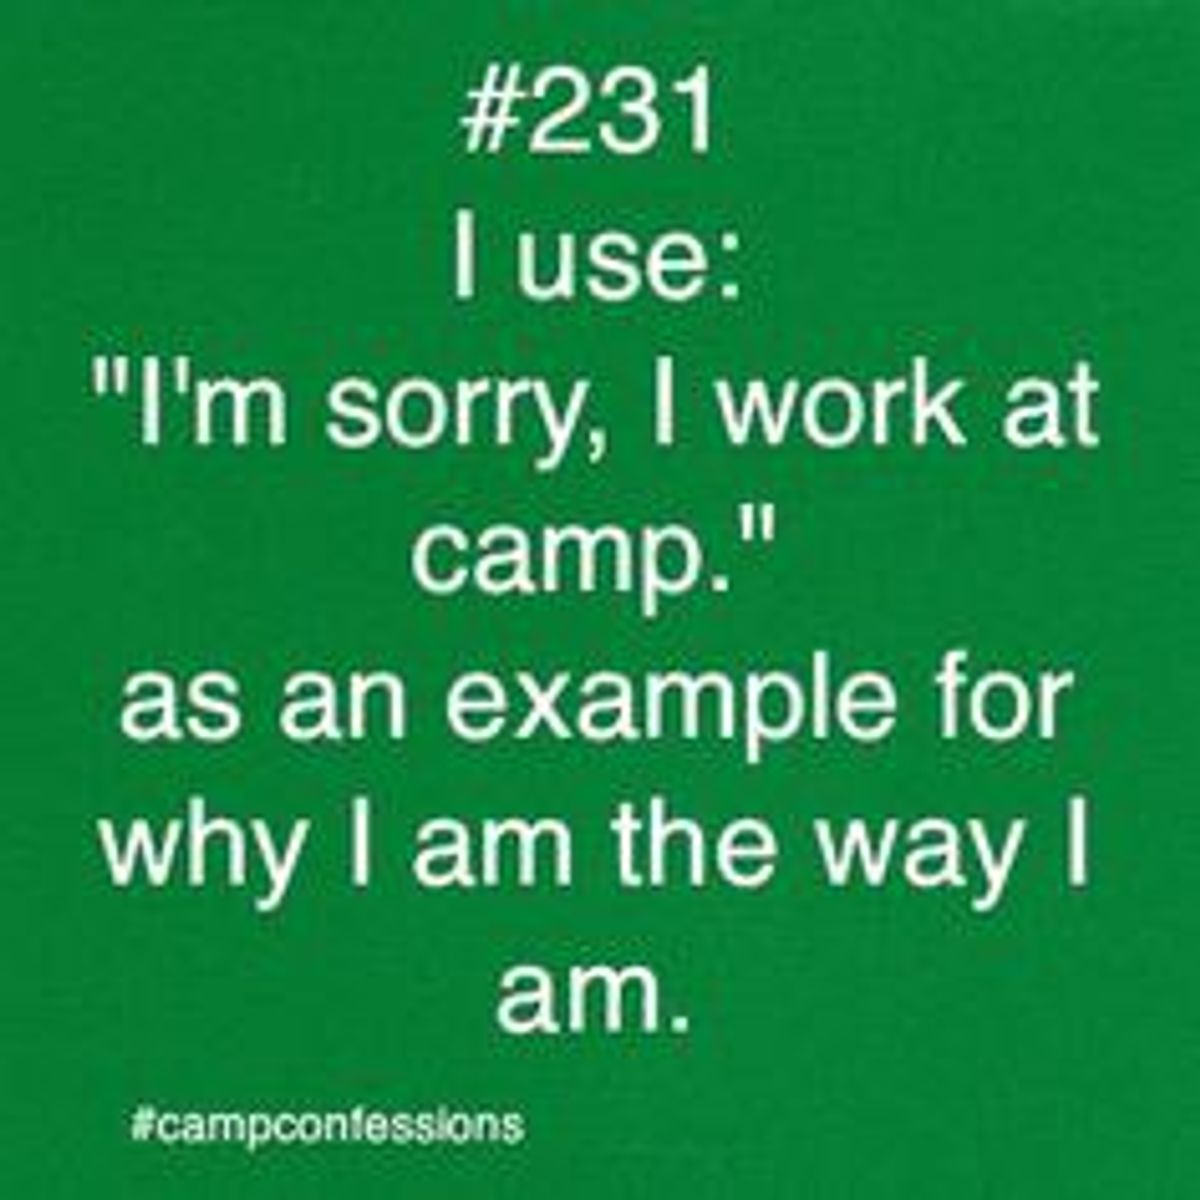 Summer Camp Phrases That Stick With You The Rest Of The Year